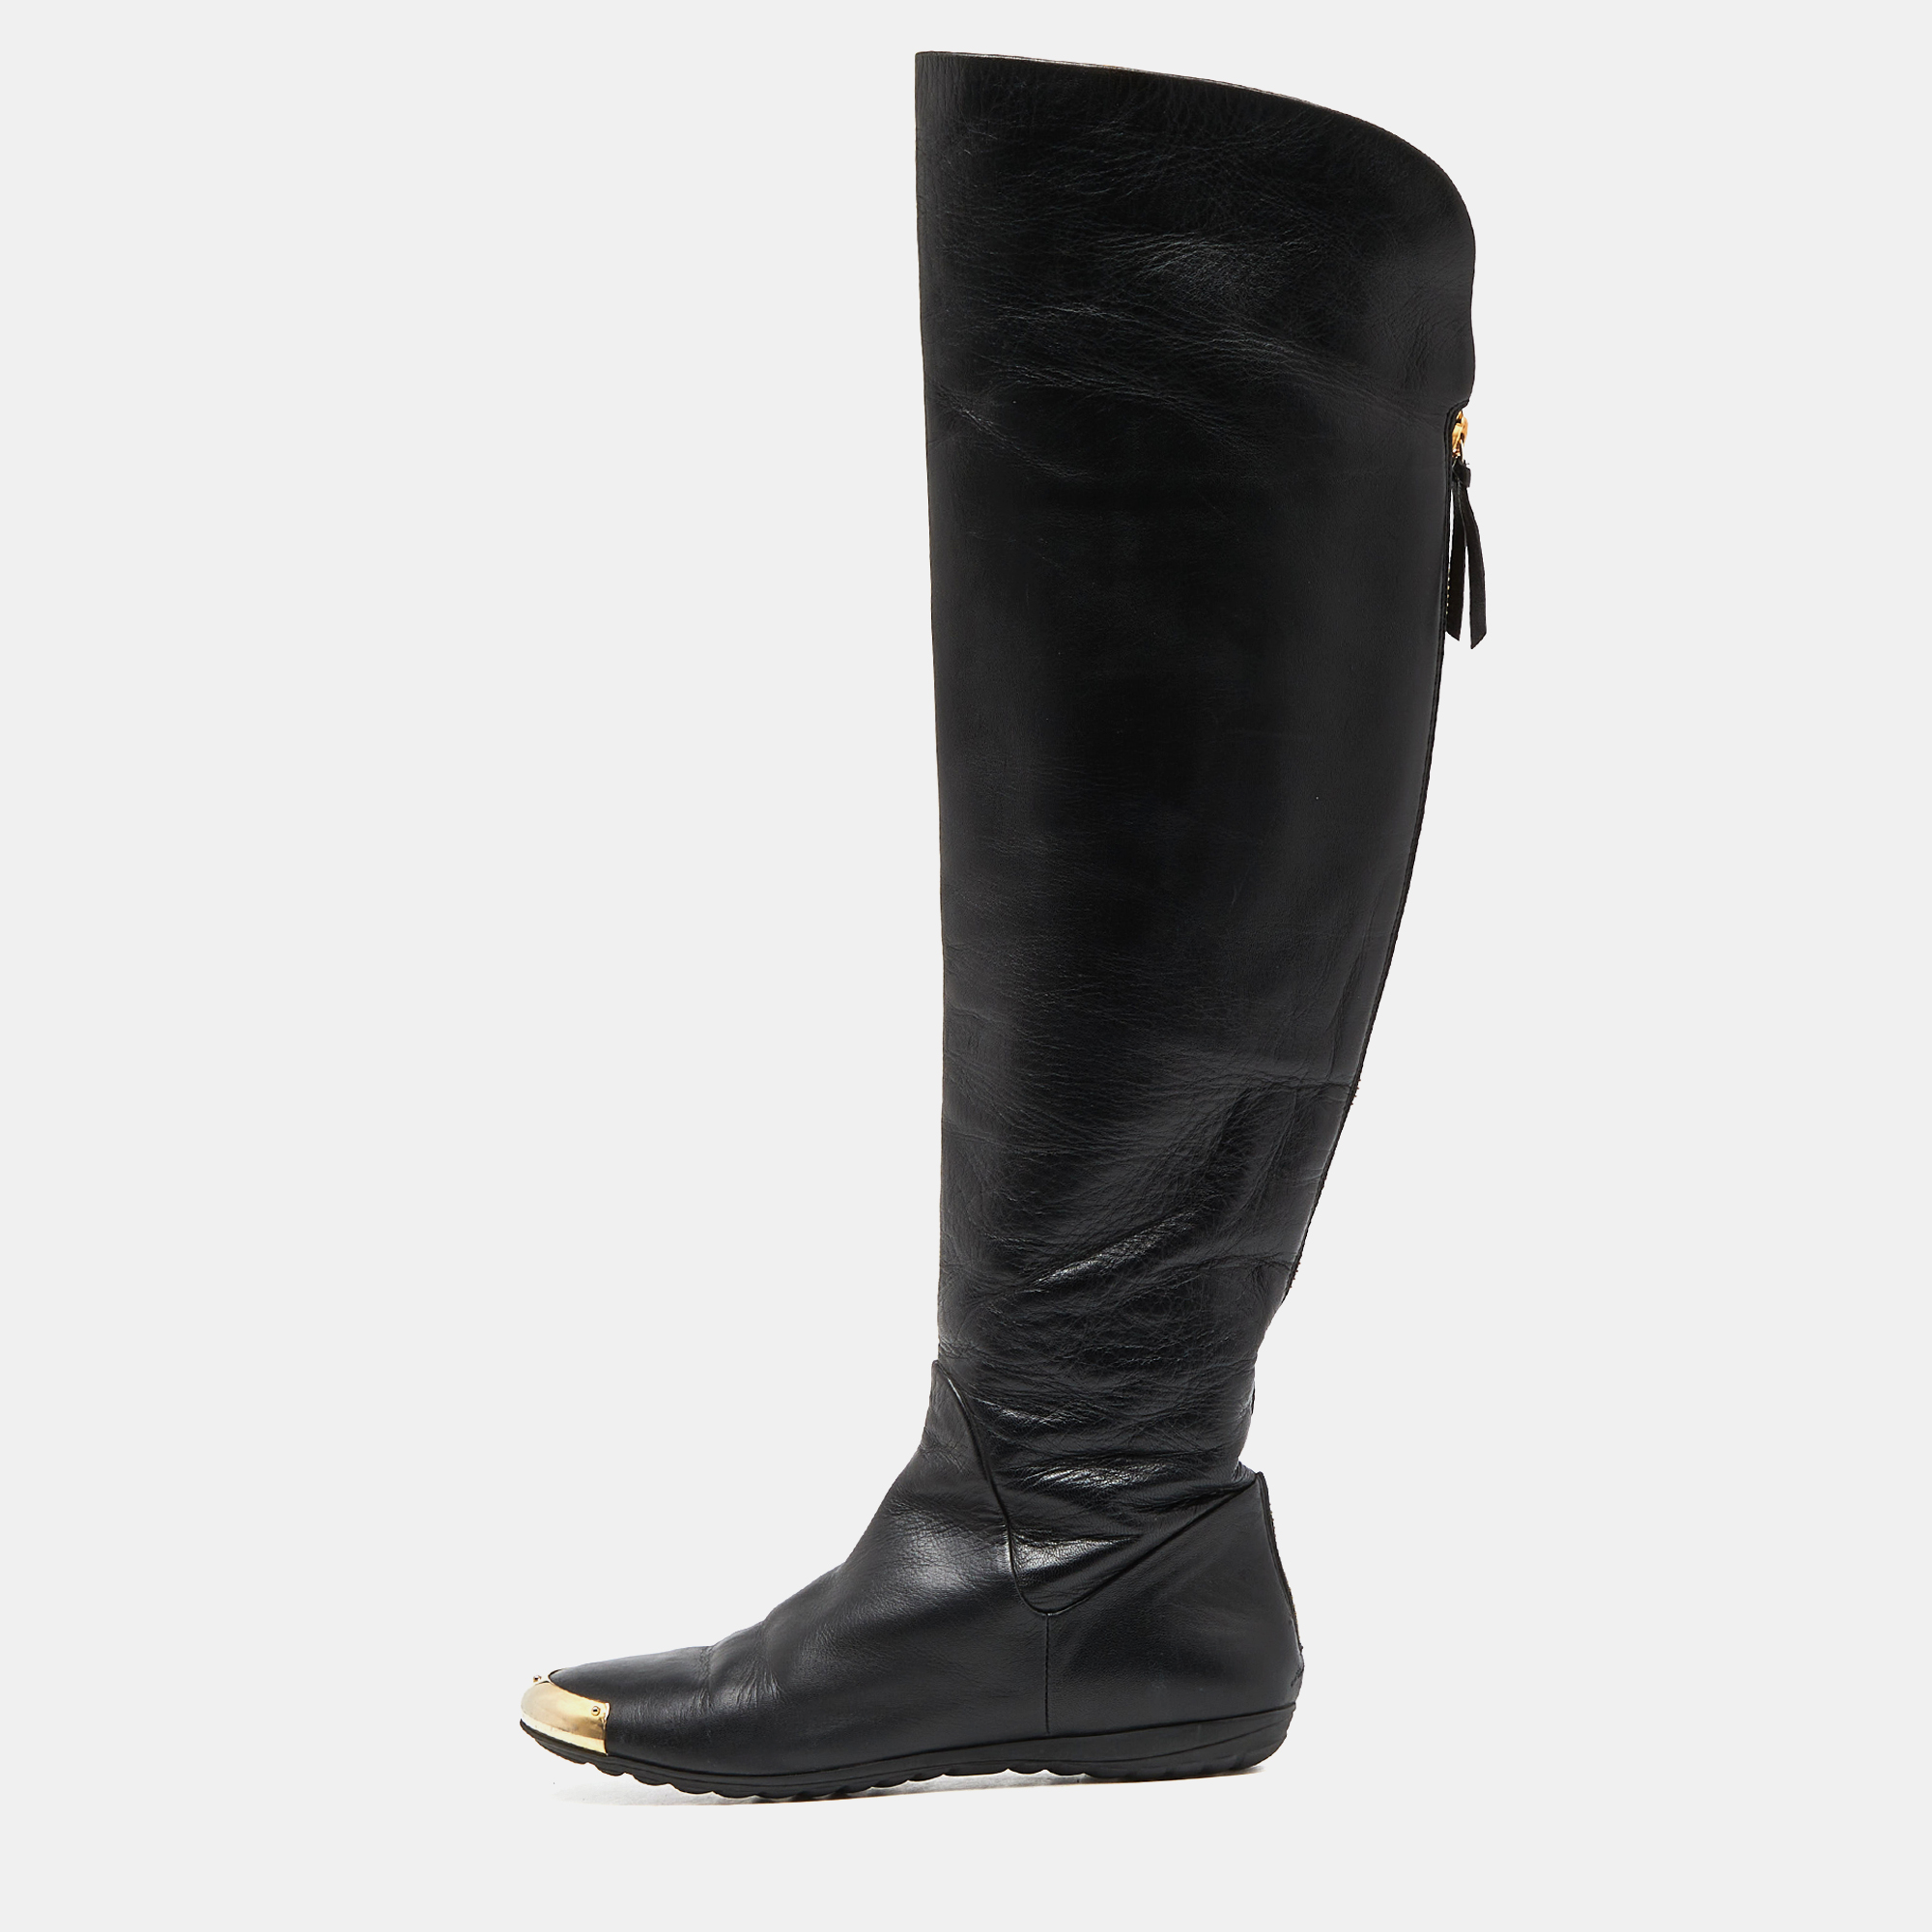 Giuseppe zanotti black leather over the knee length boots size 39